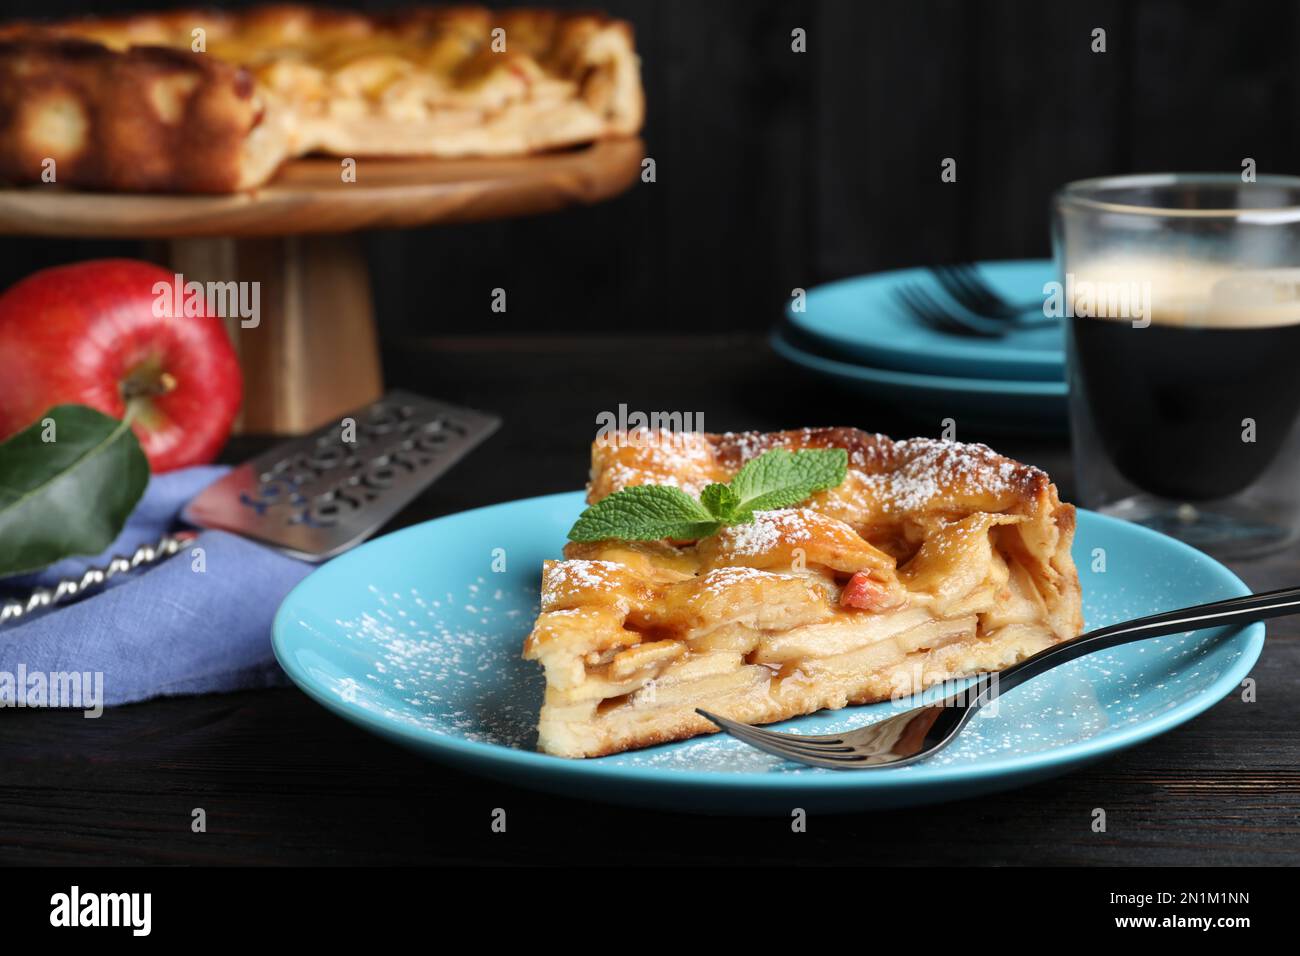 Slice of traditional apple pie served on black wooden table Stock Photo